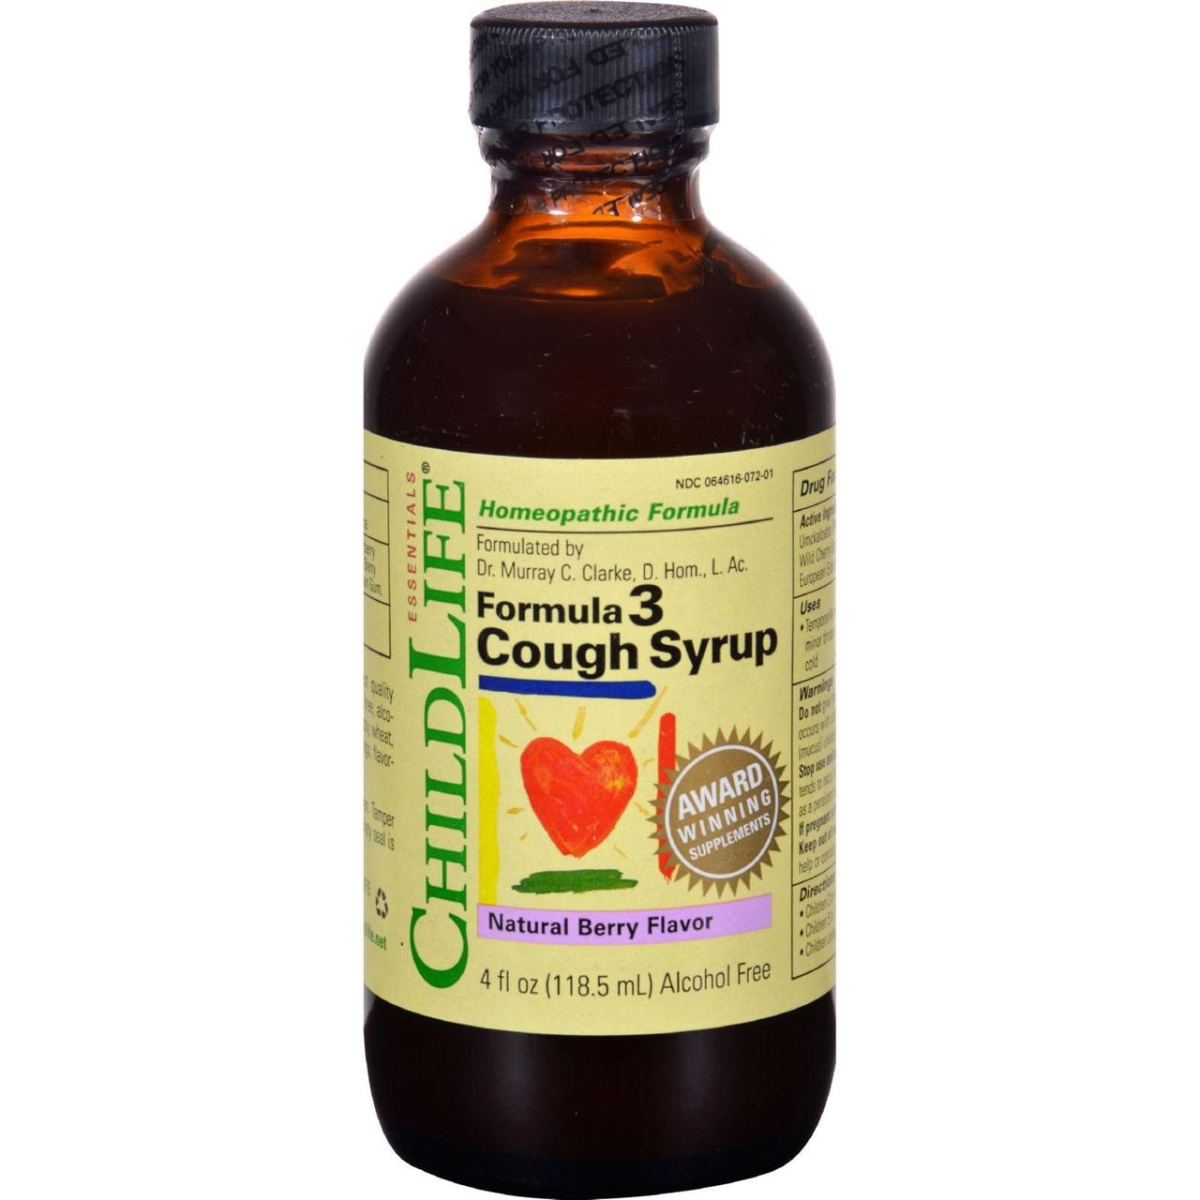 Picture of Child Life HG1000678 4 fl oz Formula 3 Cough Syrup - Natural Berry